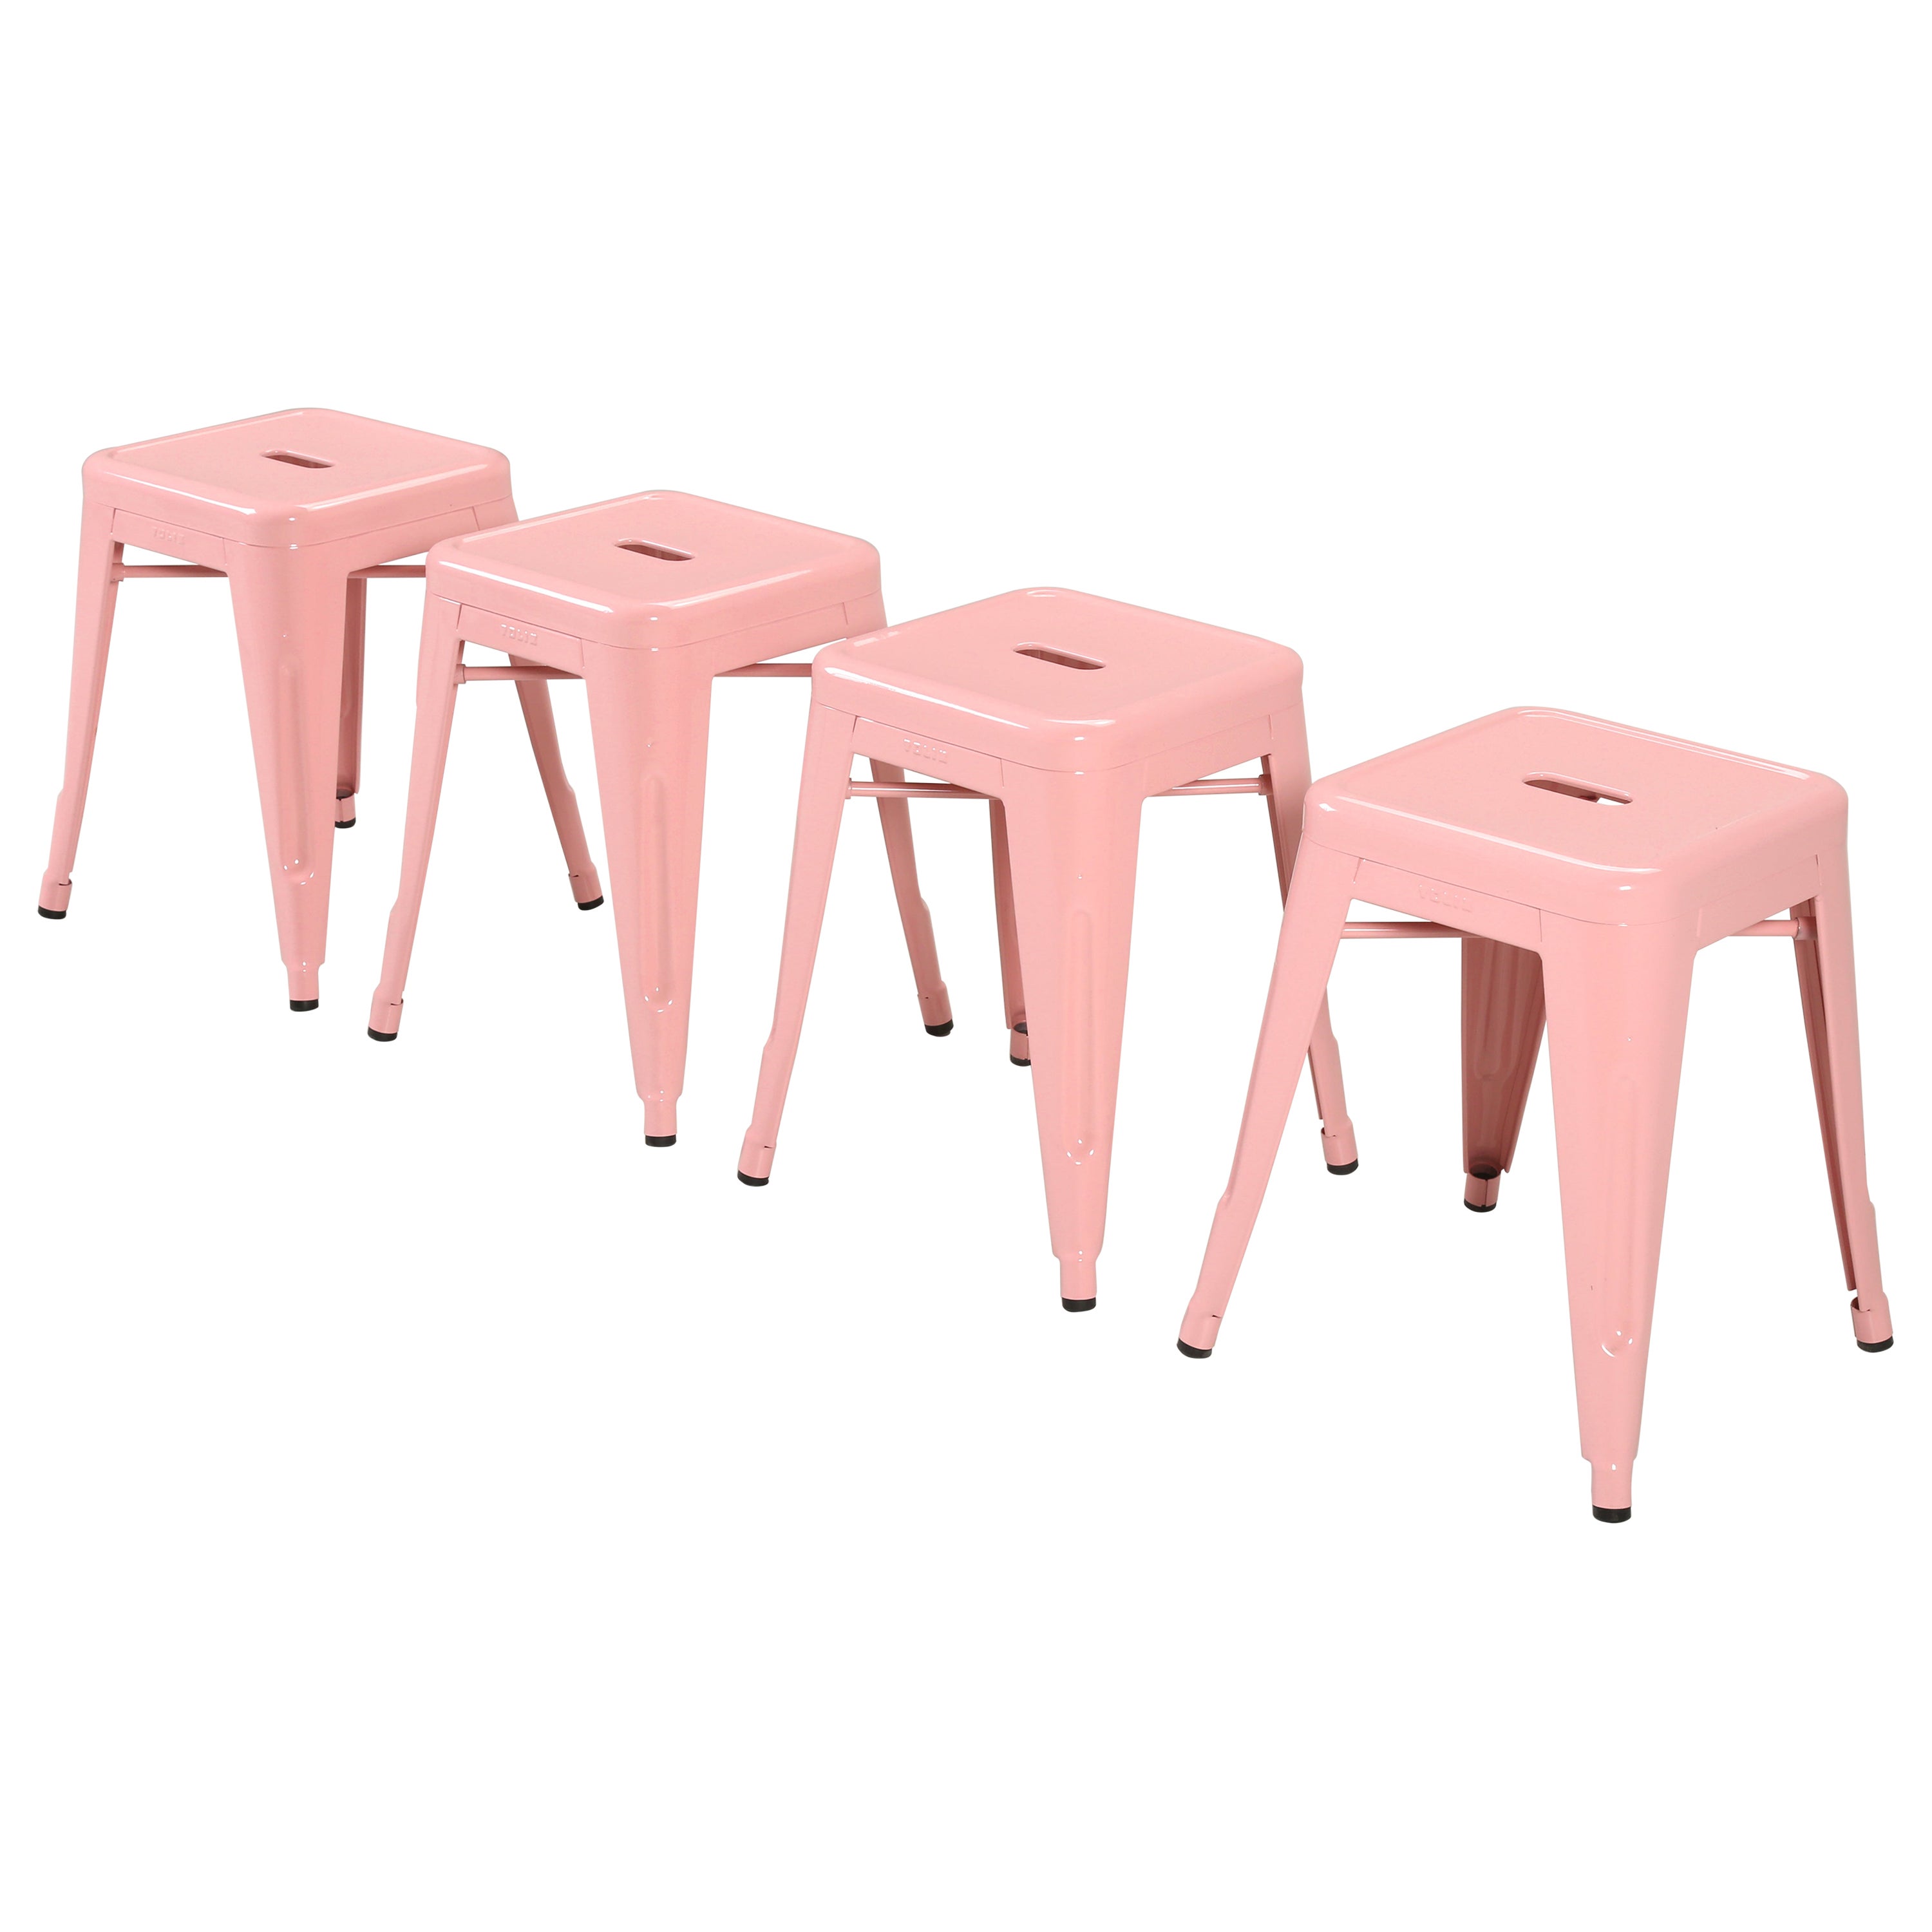 Tolix French Made Stacking Stools, Set of '4' Hundred's More to Choose From